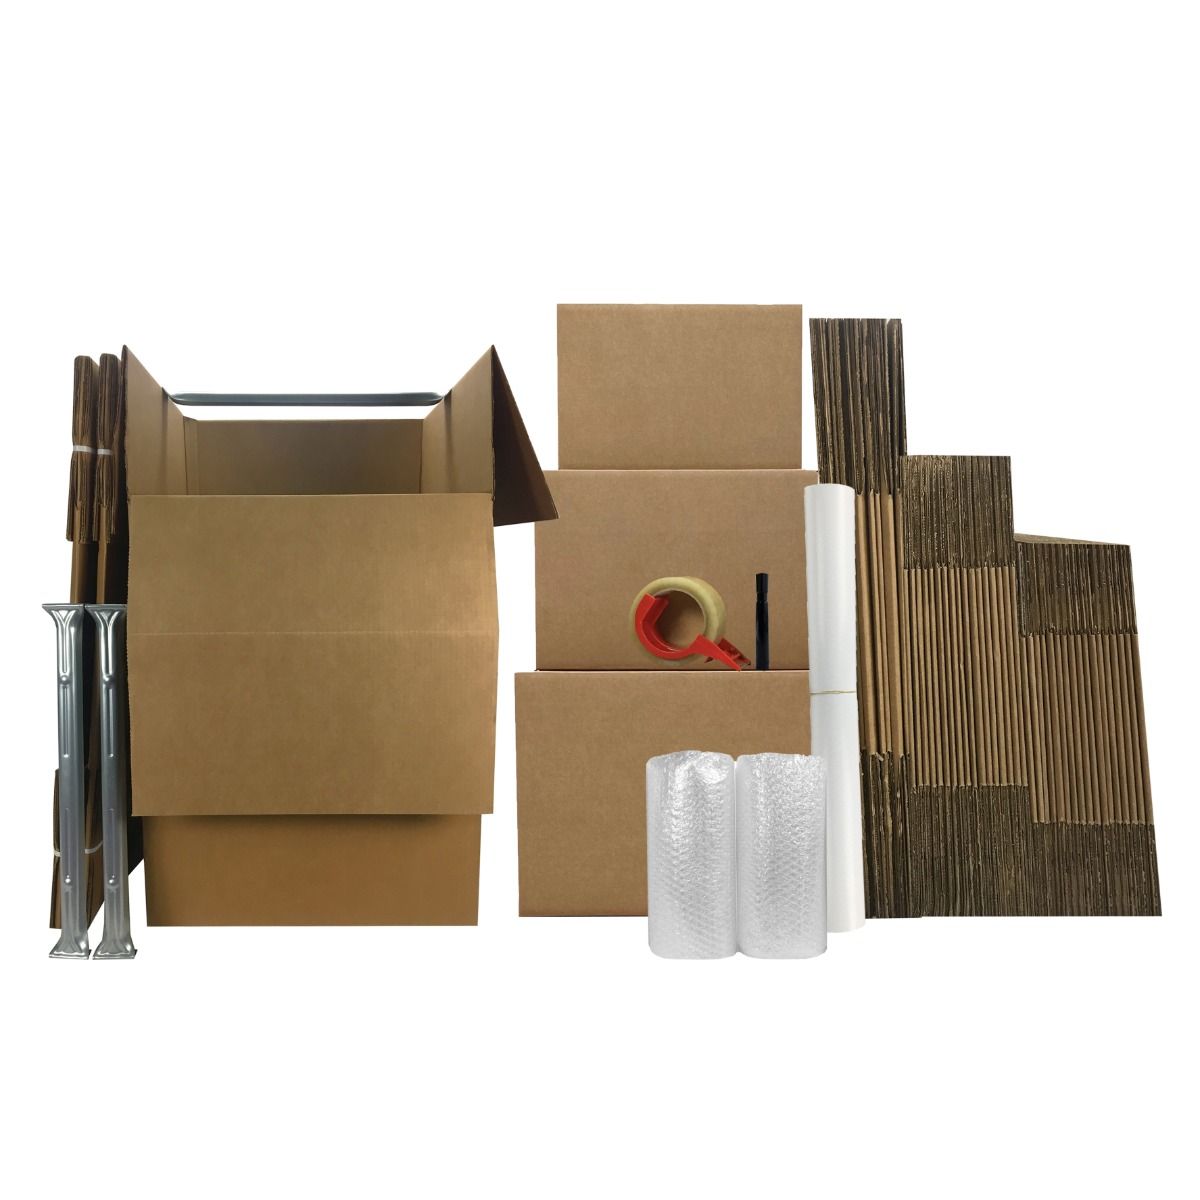 Uboxes Larger Wardrobe 24 x 24 x 40-Inches Moving Boxes Bundle of 3